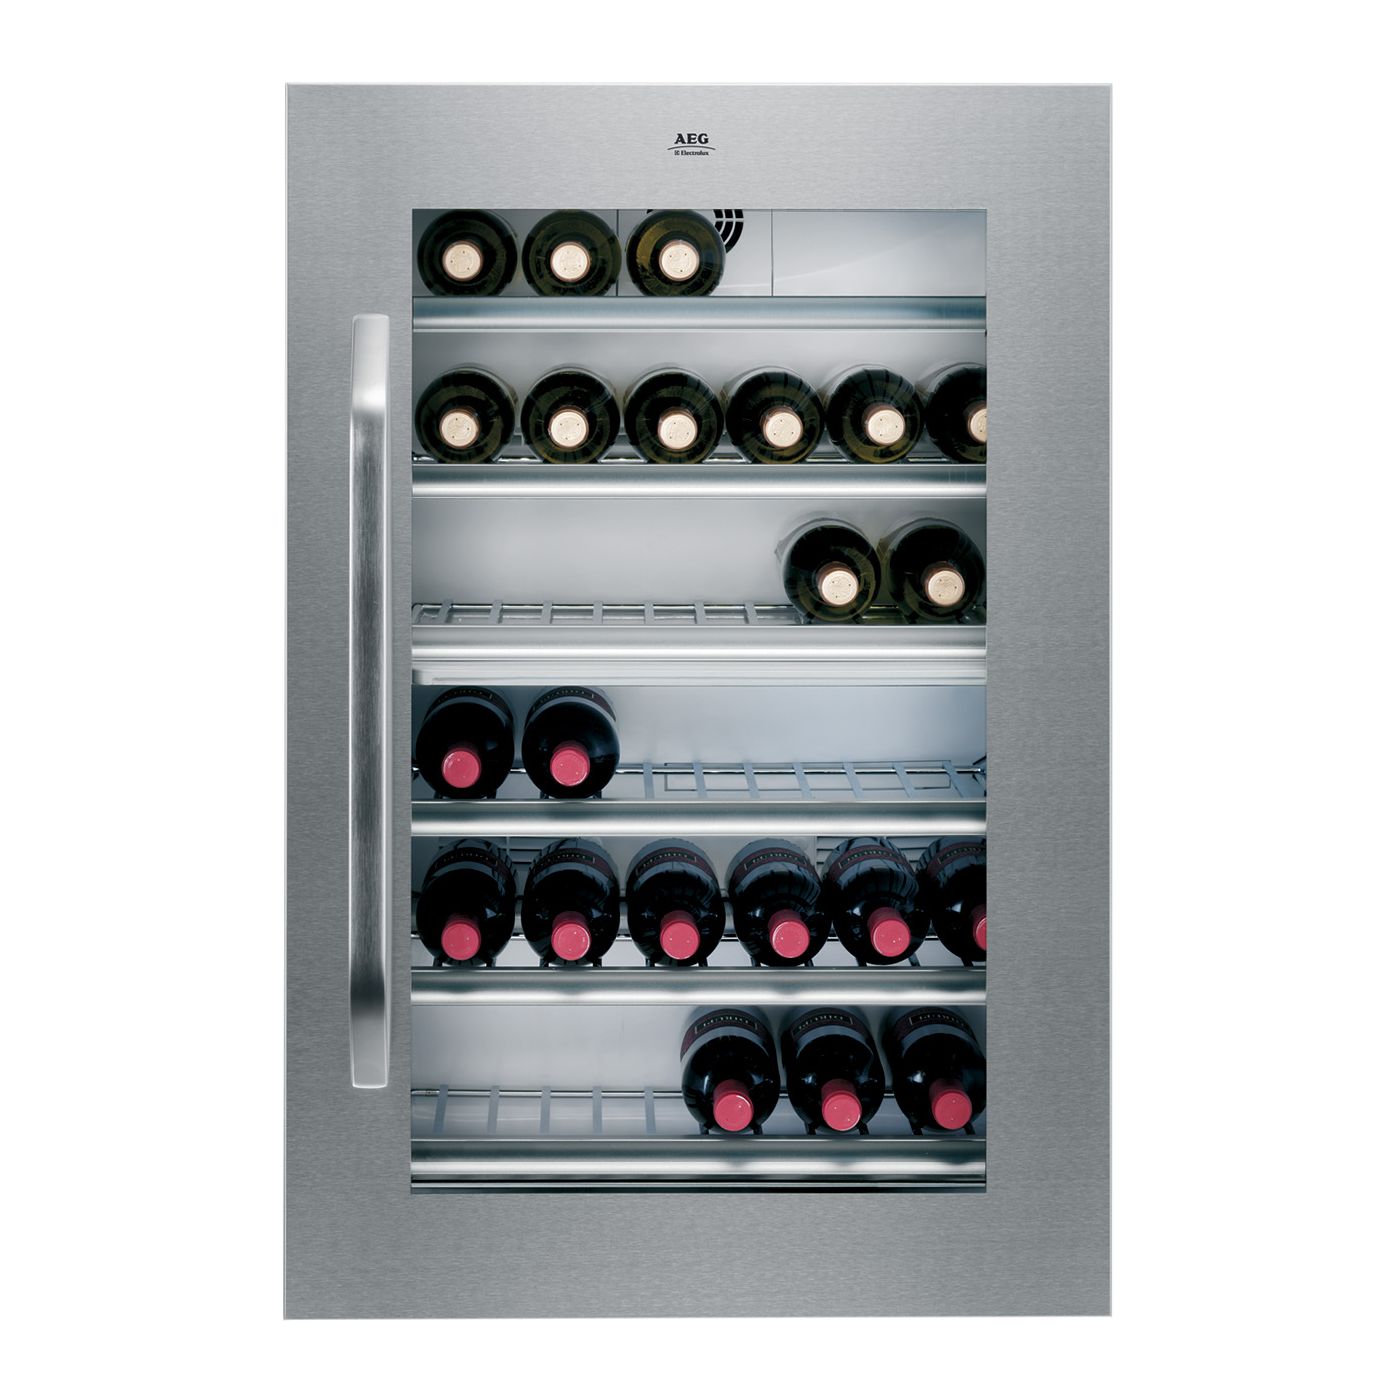 AEG SW988205L Wine Cooler, Stainless Steel at JohnLewis